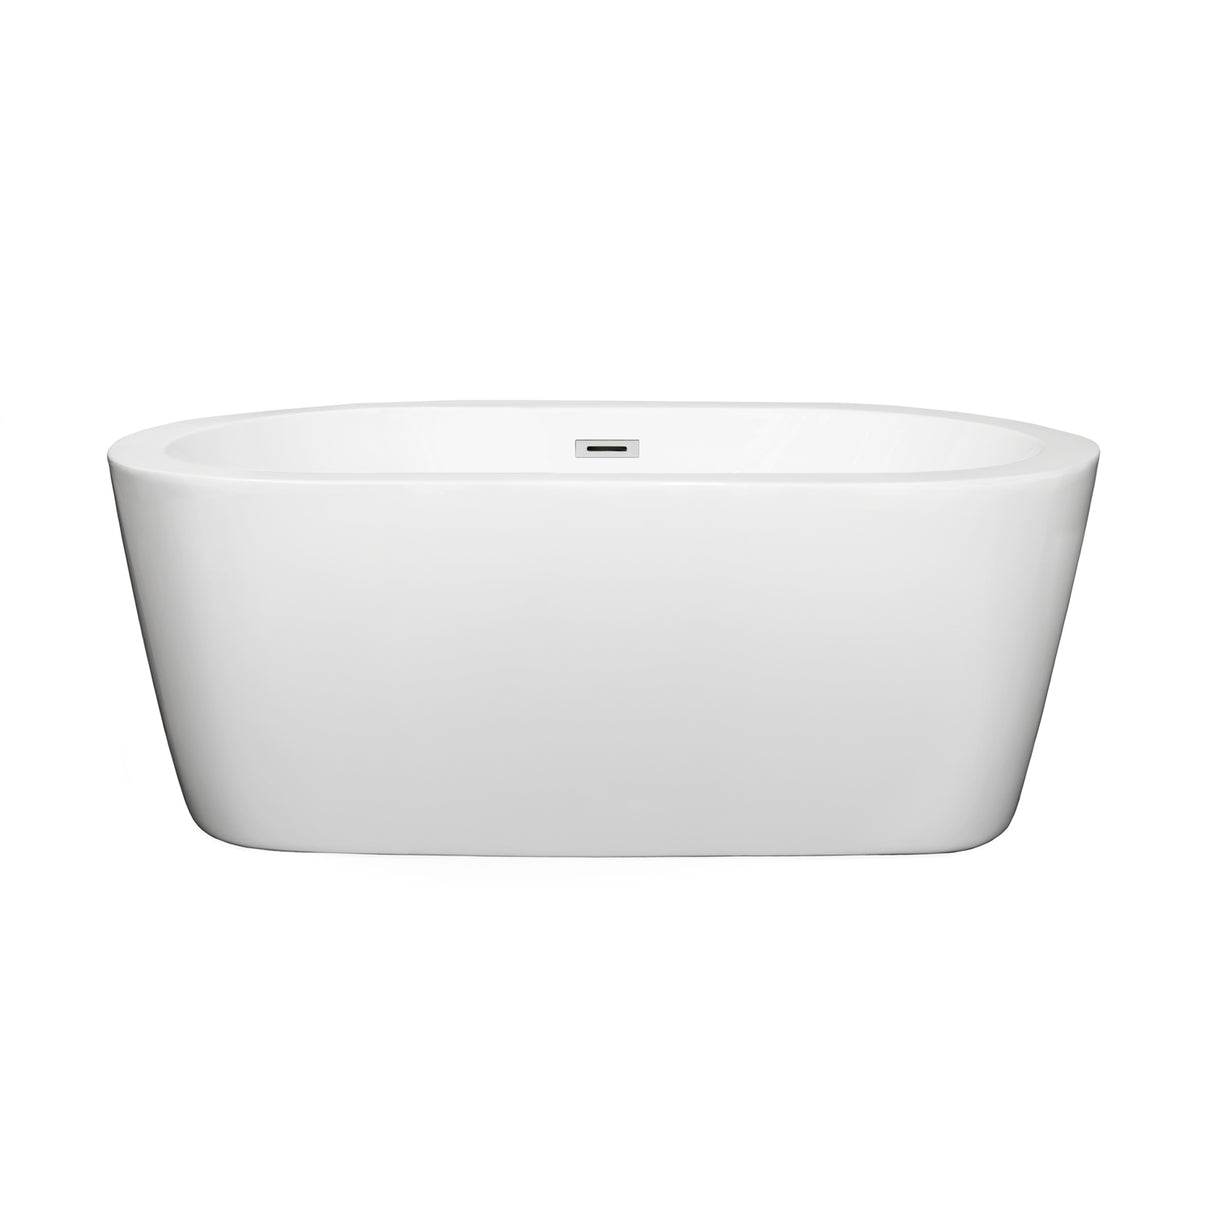 Mermaid 60 Inch Freestanding Bathtub in White with Polished Chrome Drain and Overflow Trim